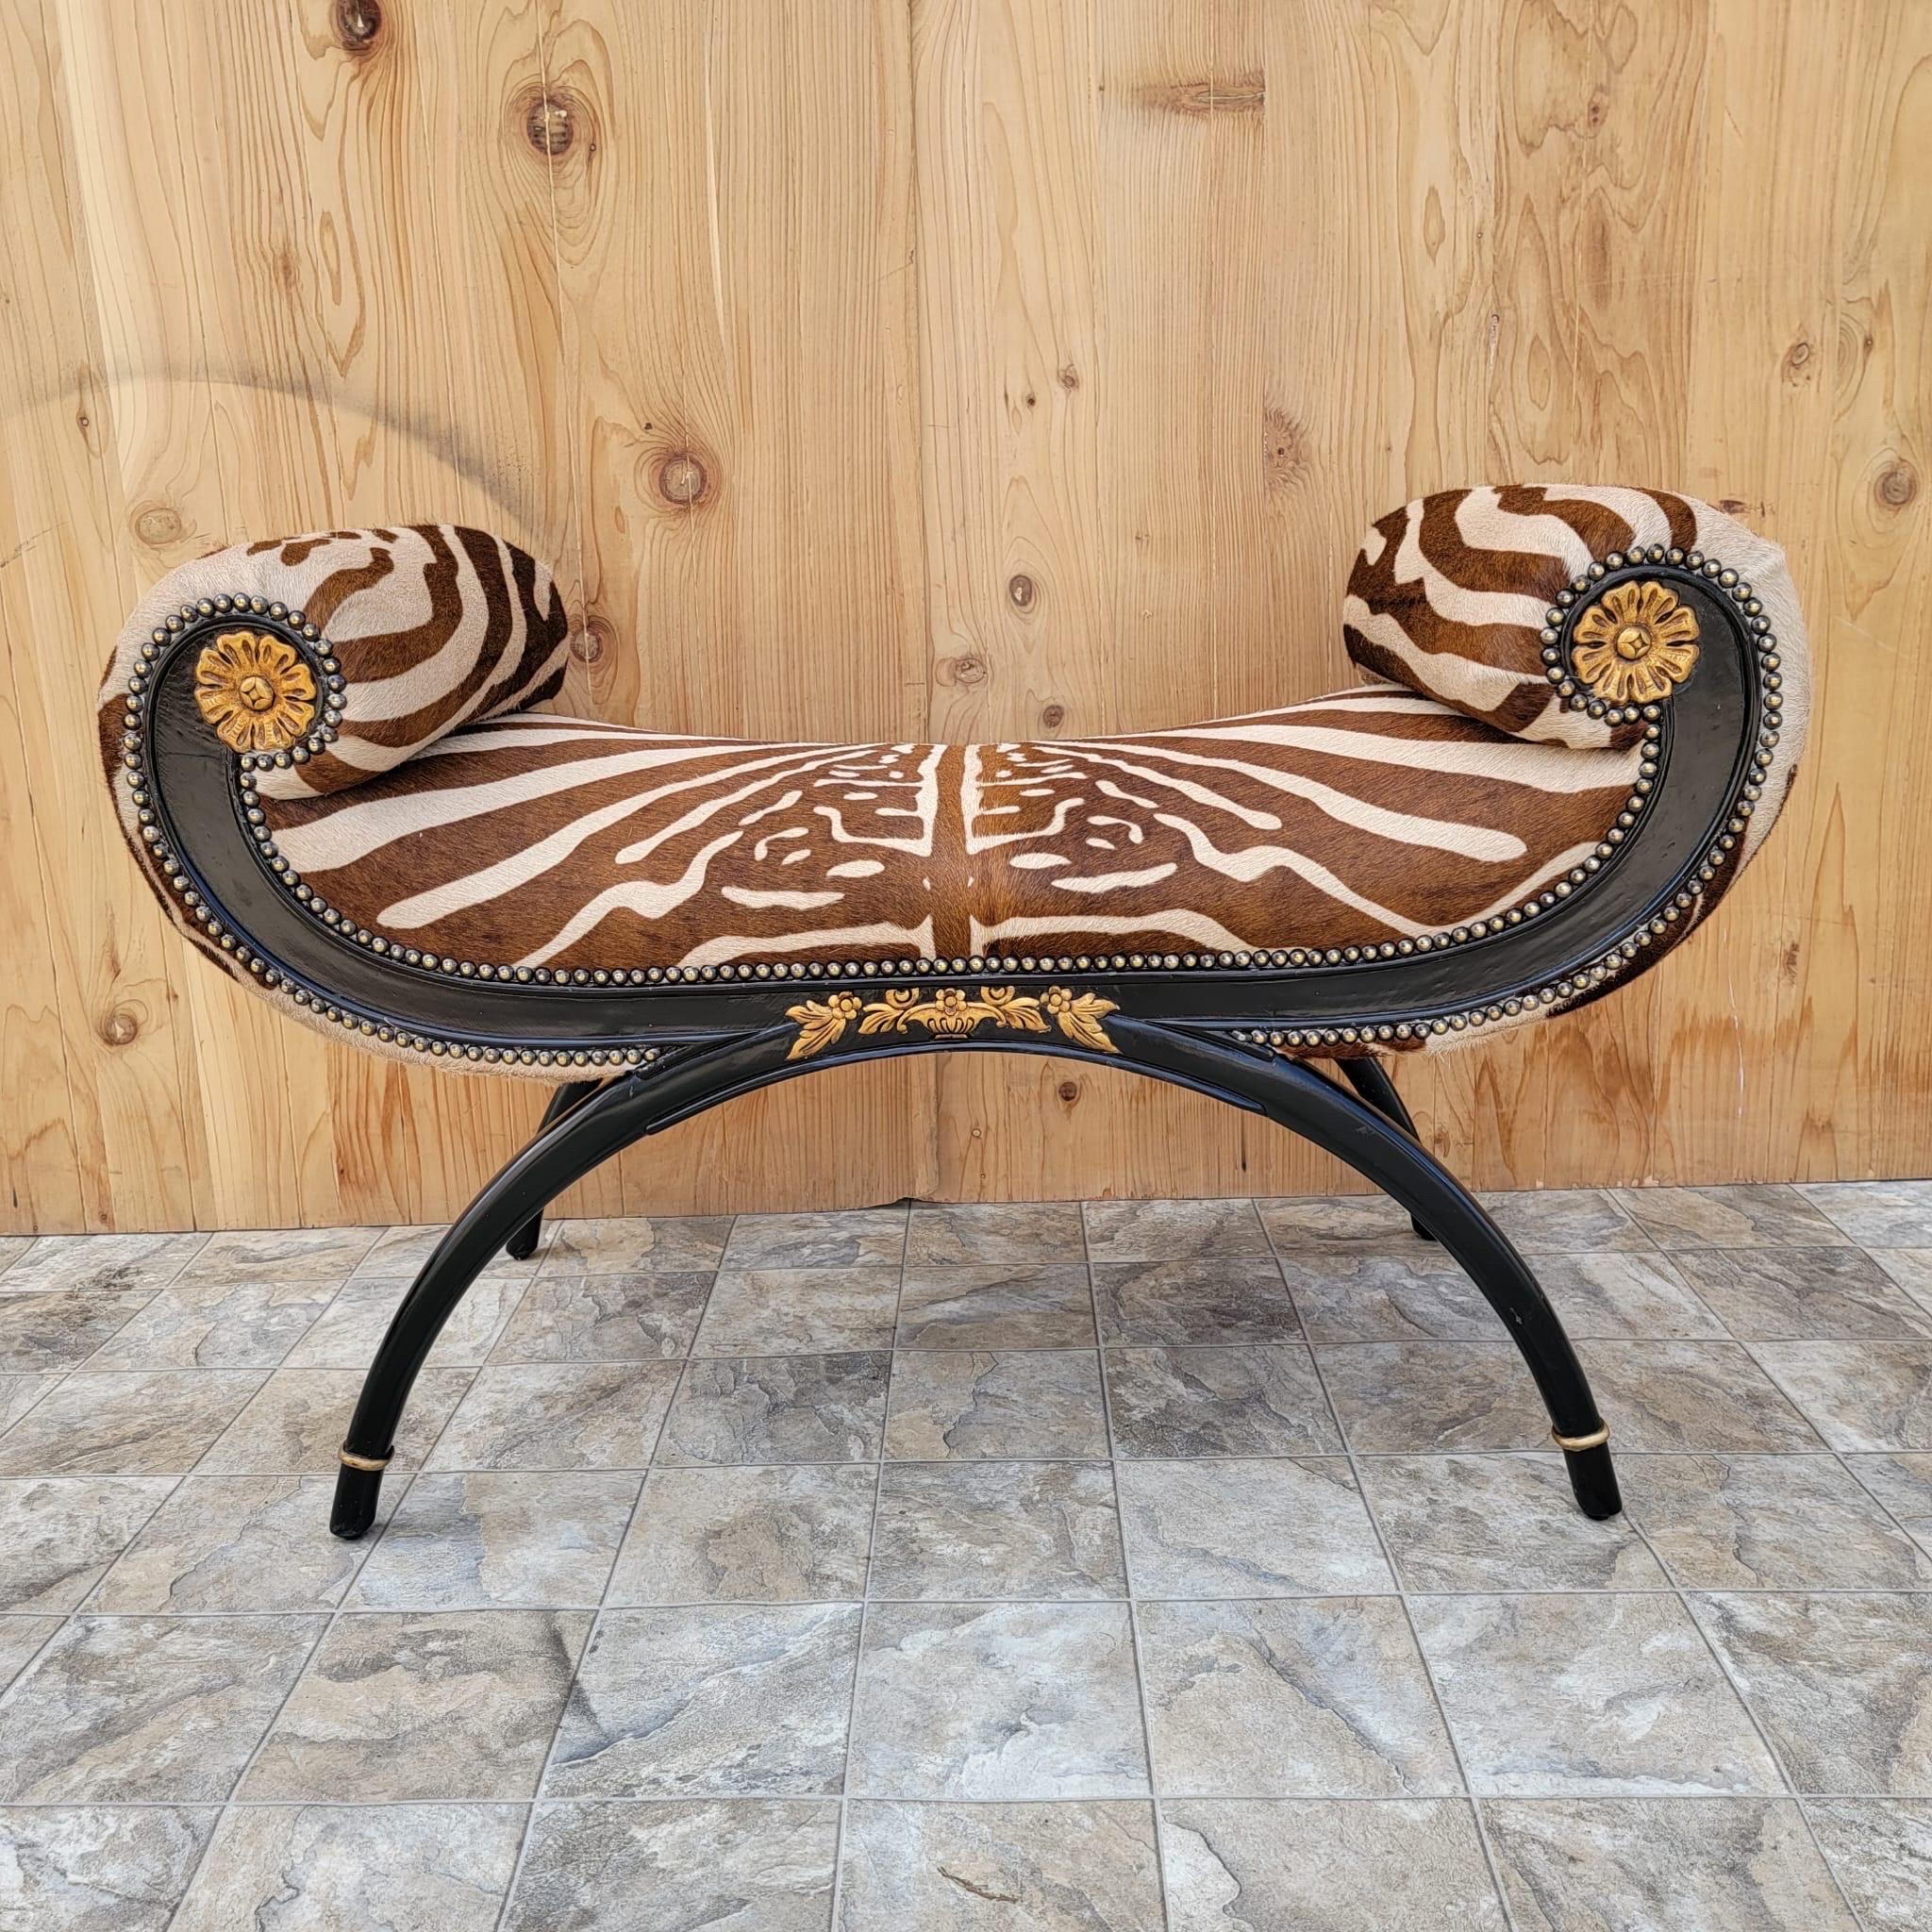 Regency Style Ebonized and Gilded Wood Scroll-Arm Zebra Striped Cowhide Bench For Sale 1